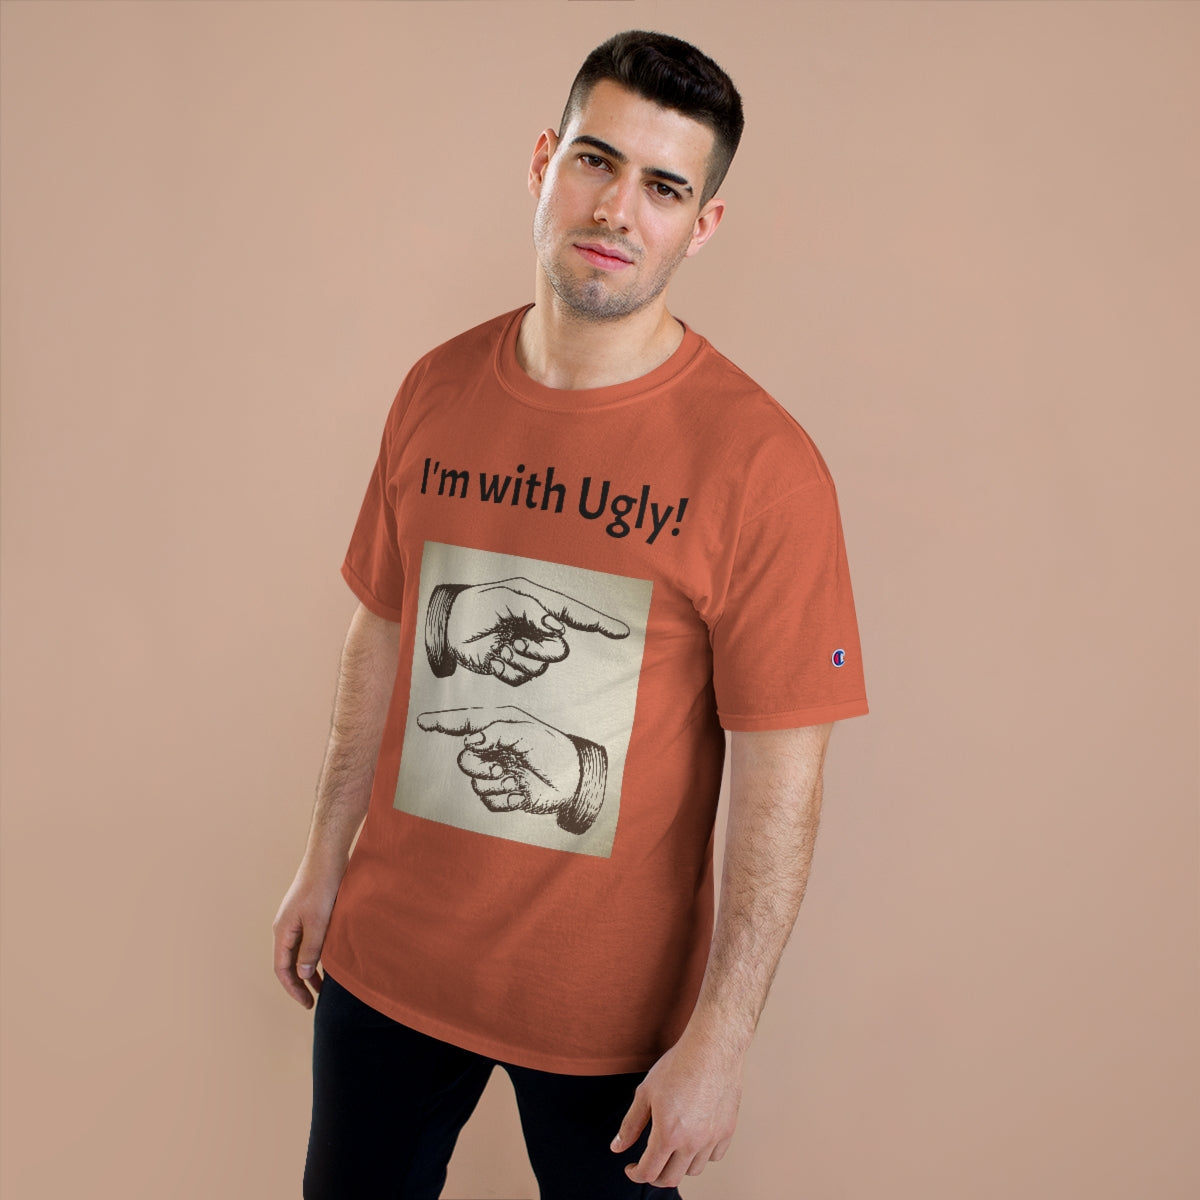 The "I'm with Ugly" Champion T-Shirt